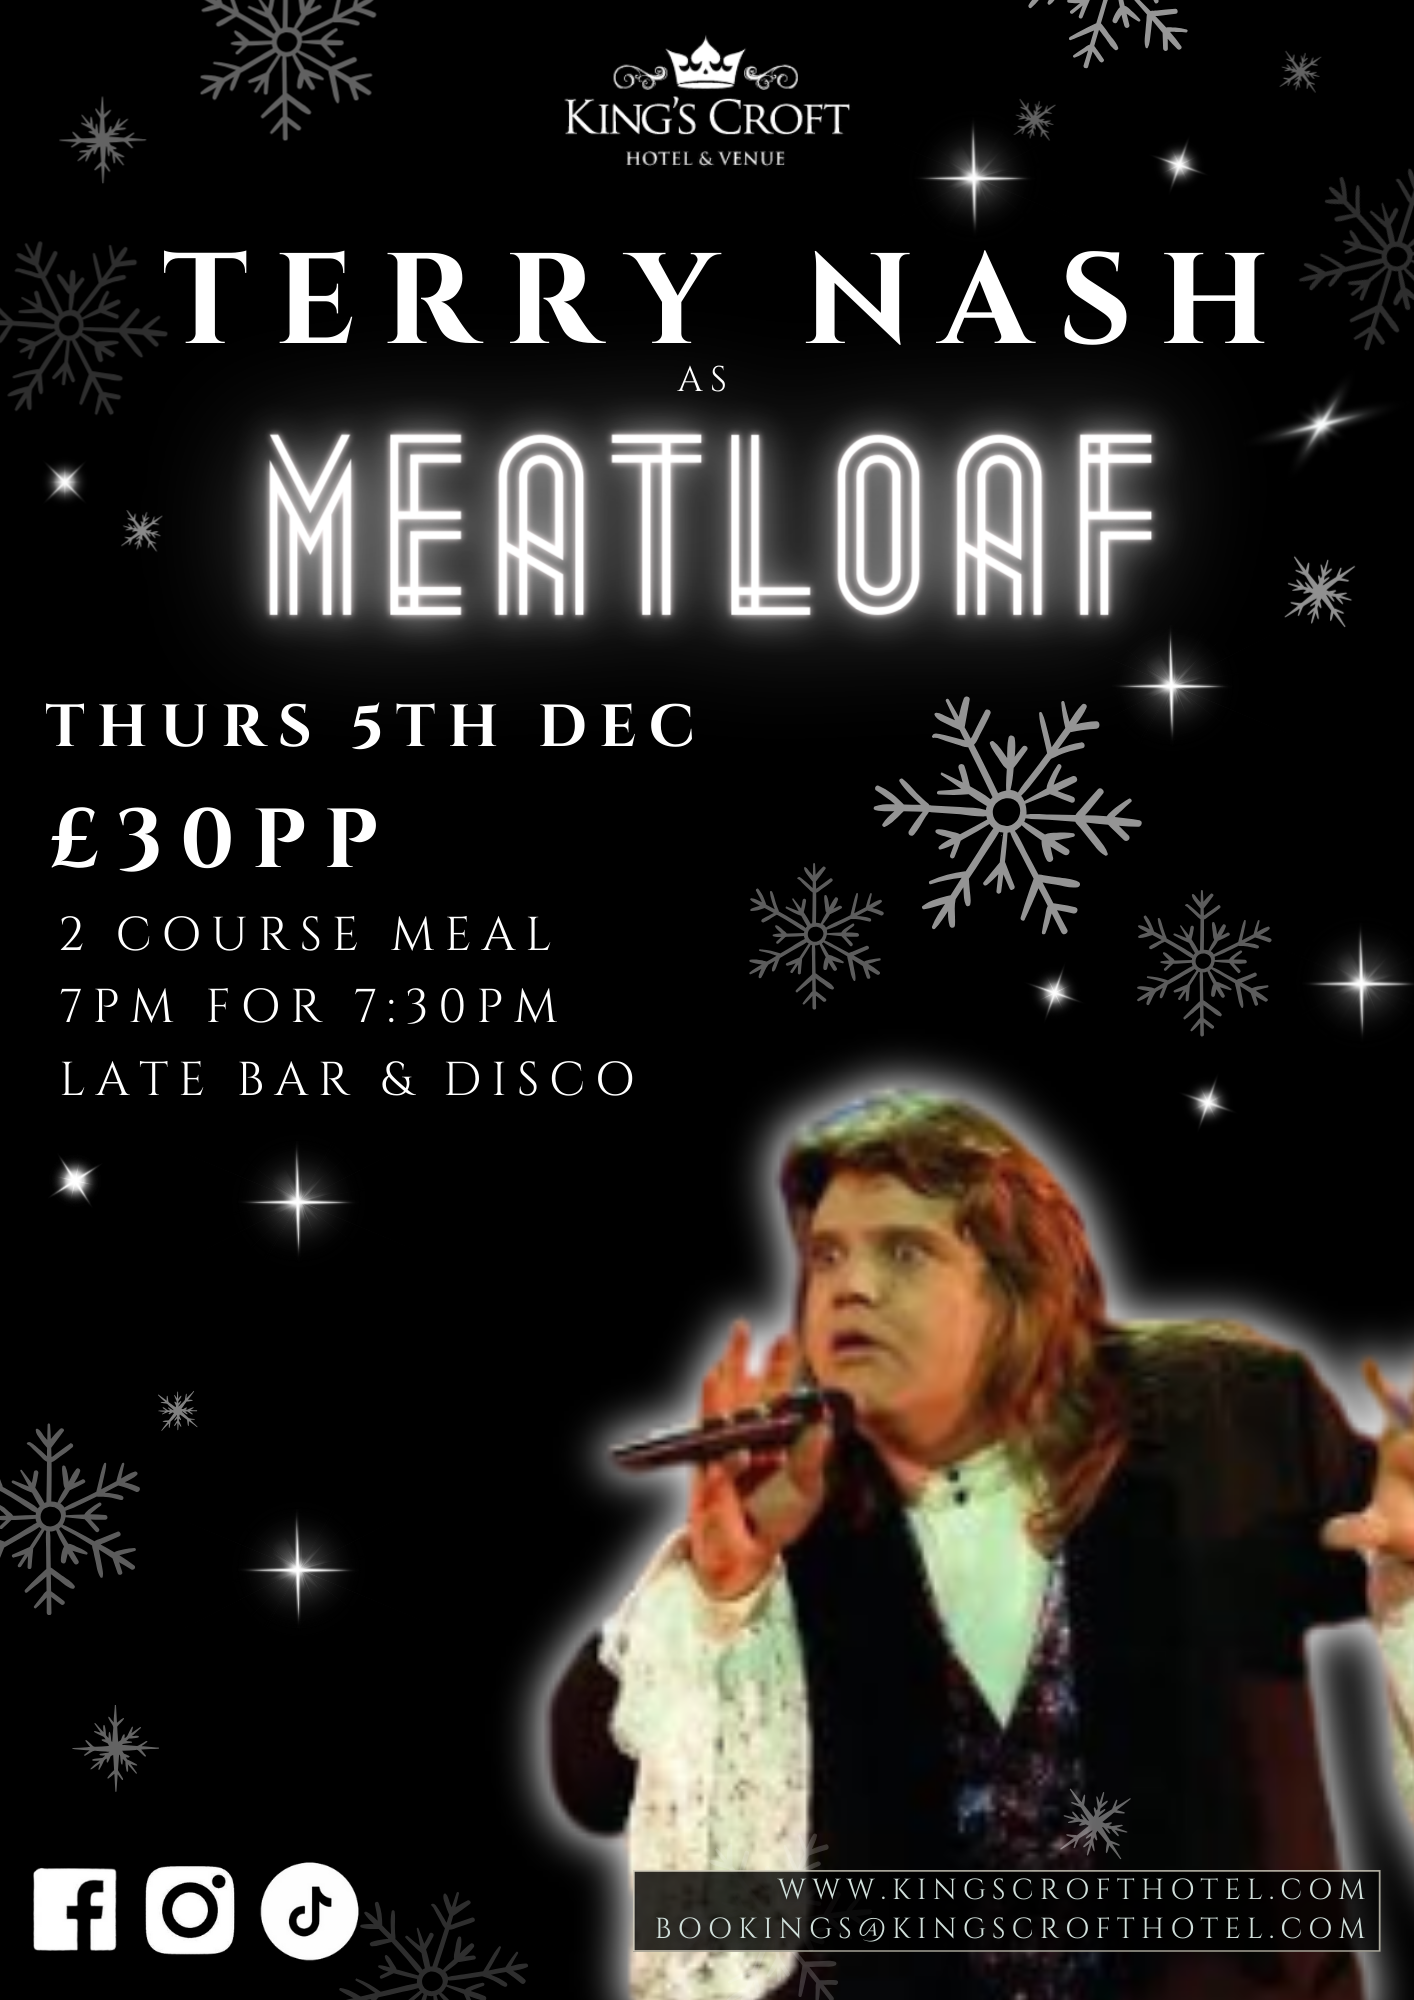 Terry Nash as Meatloaf